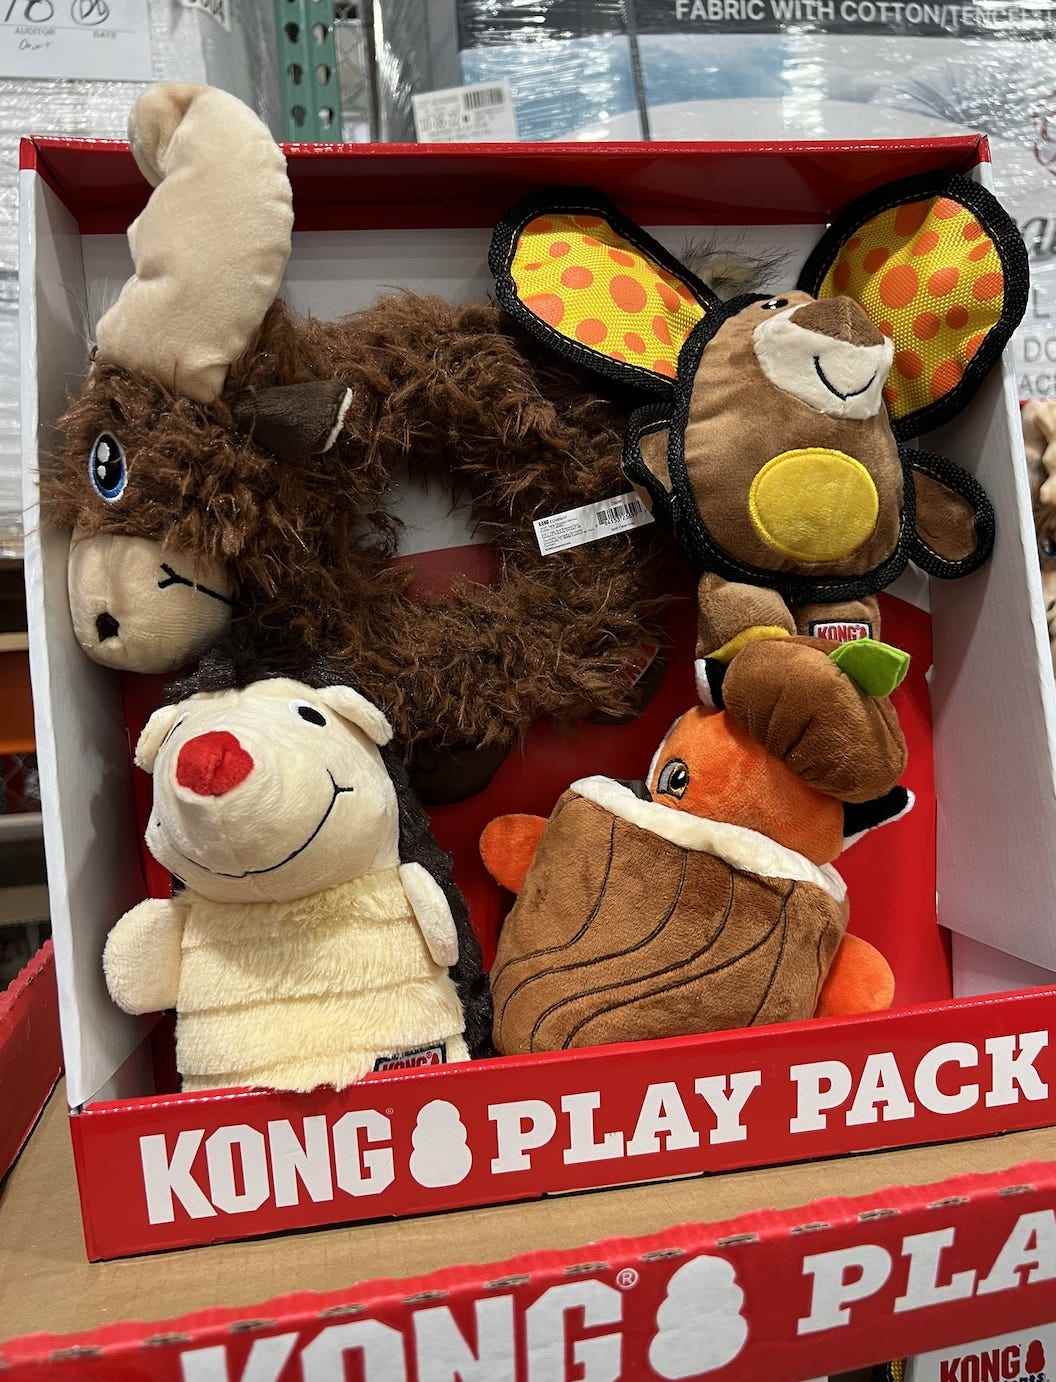 Kong Play Pack bei Costco